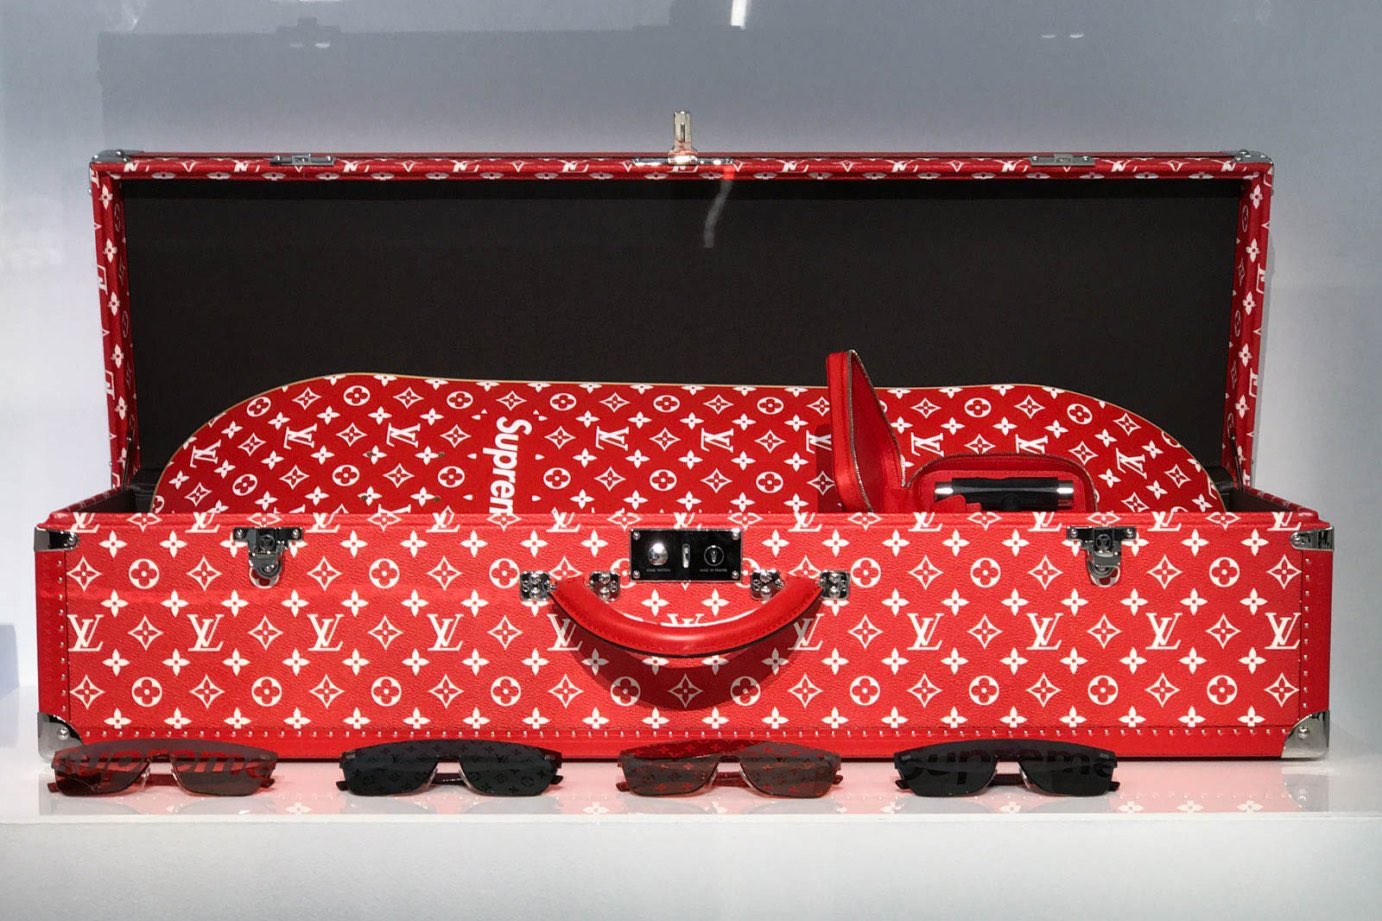 MRBLD on Twitter: &quot;A more detailed look on the Supreme/Louis Vuitton Skate Set (Box, Deck ...